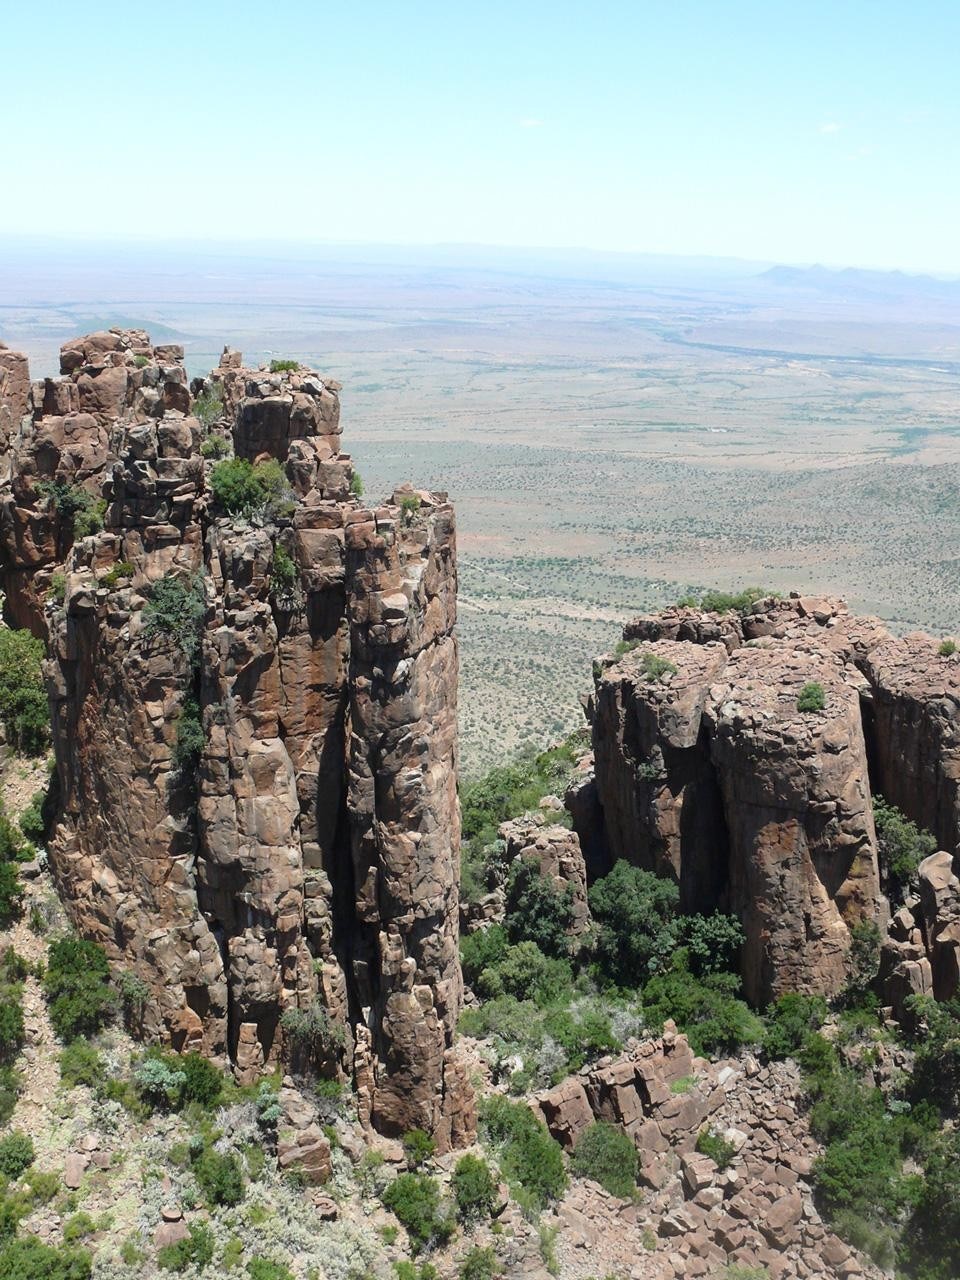 View from the Valley of Desolation, the most spectacular point in Camdeboo National Park